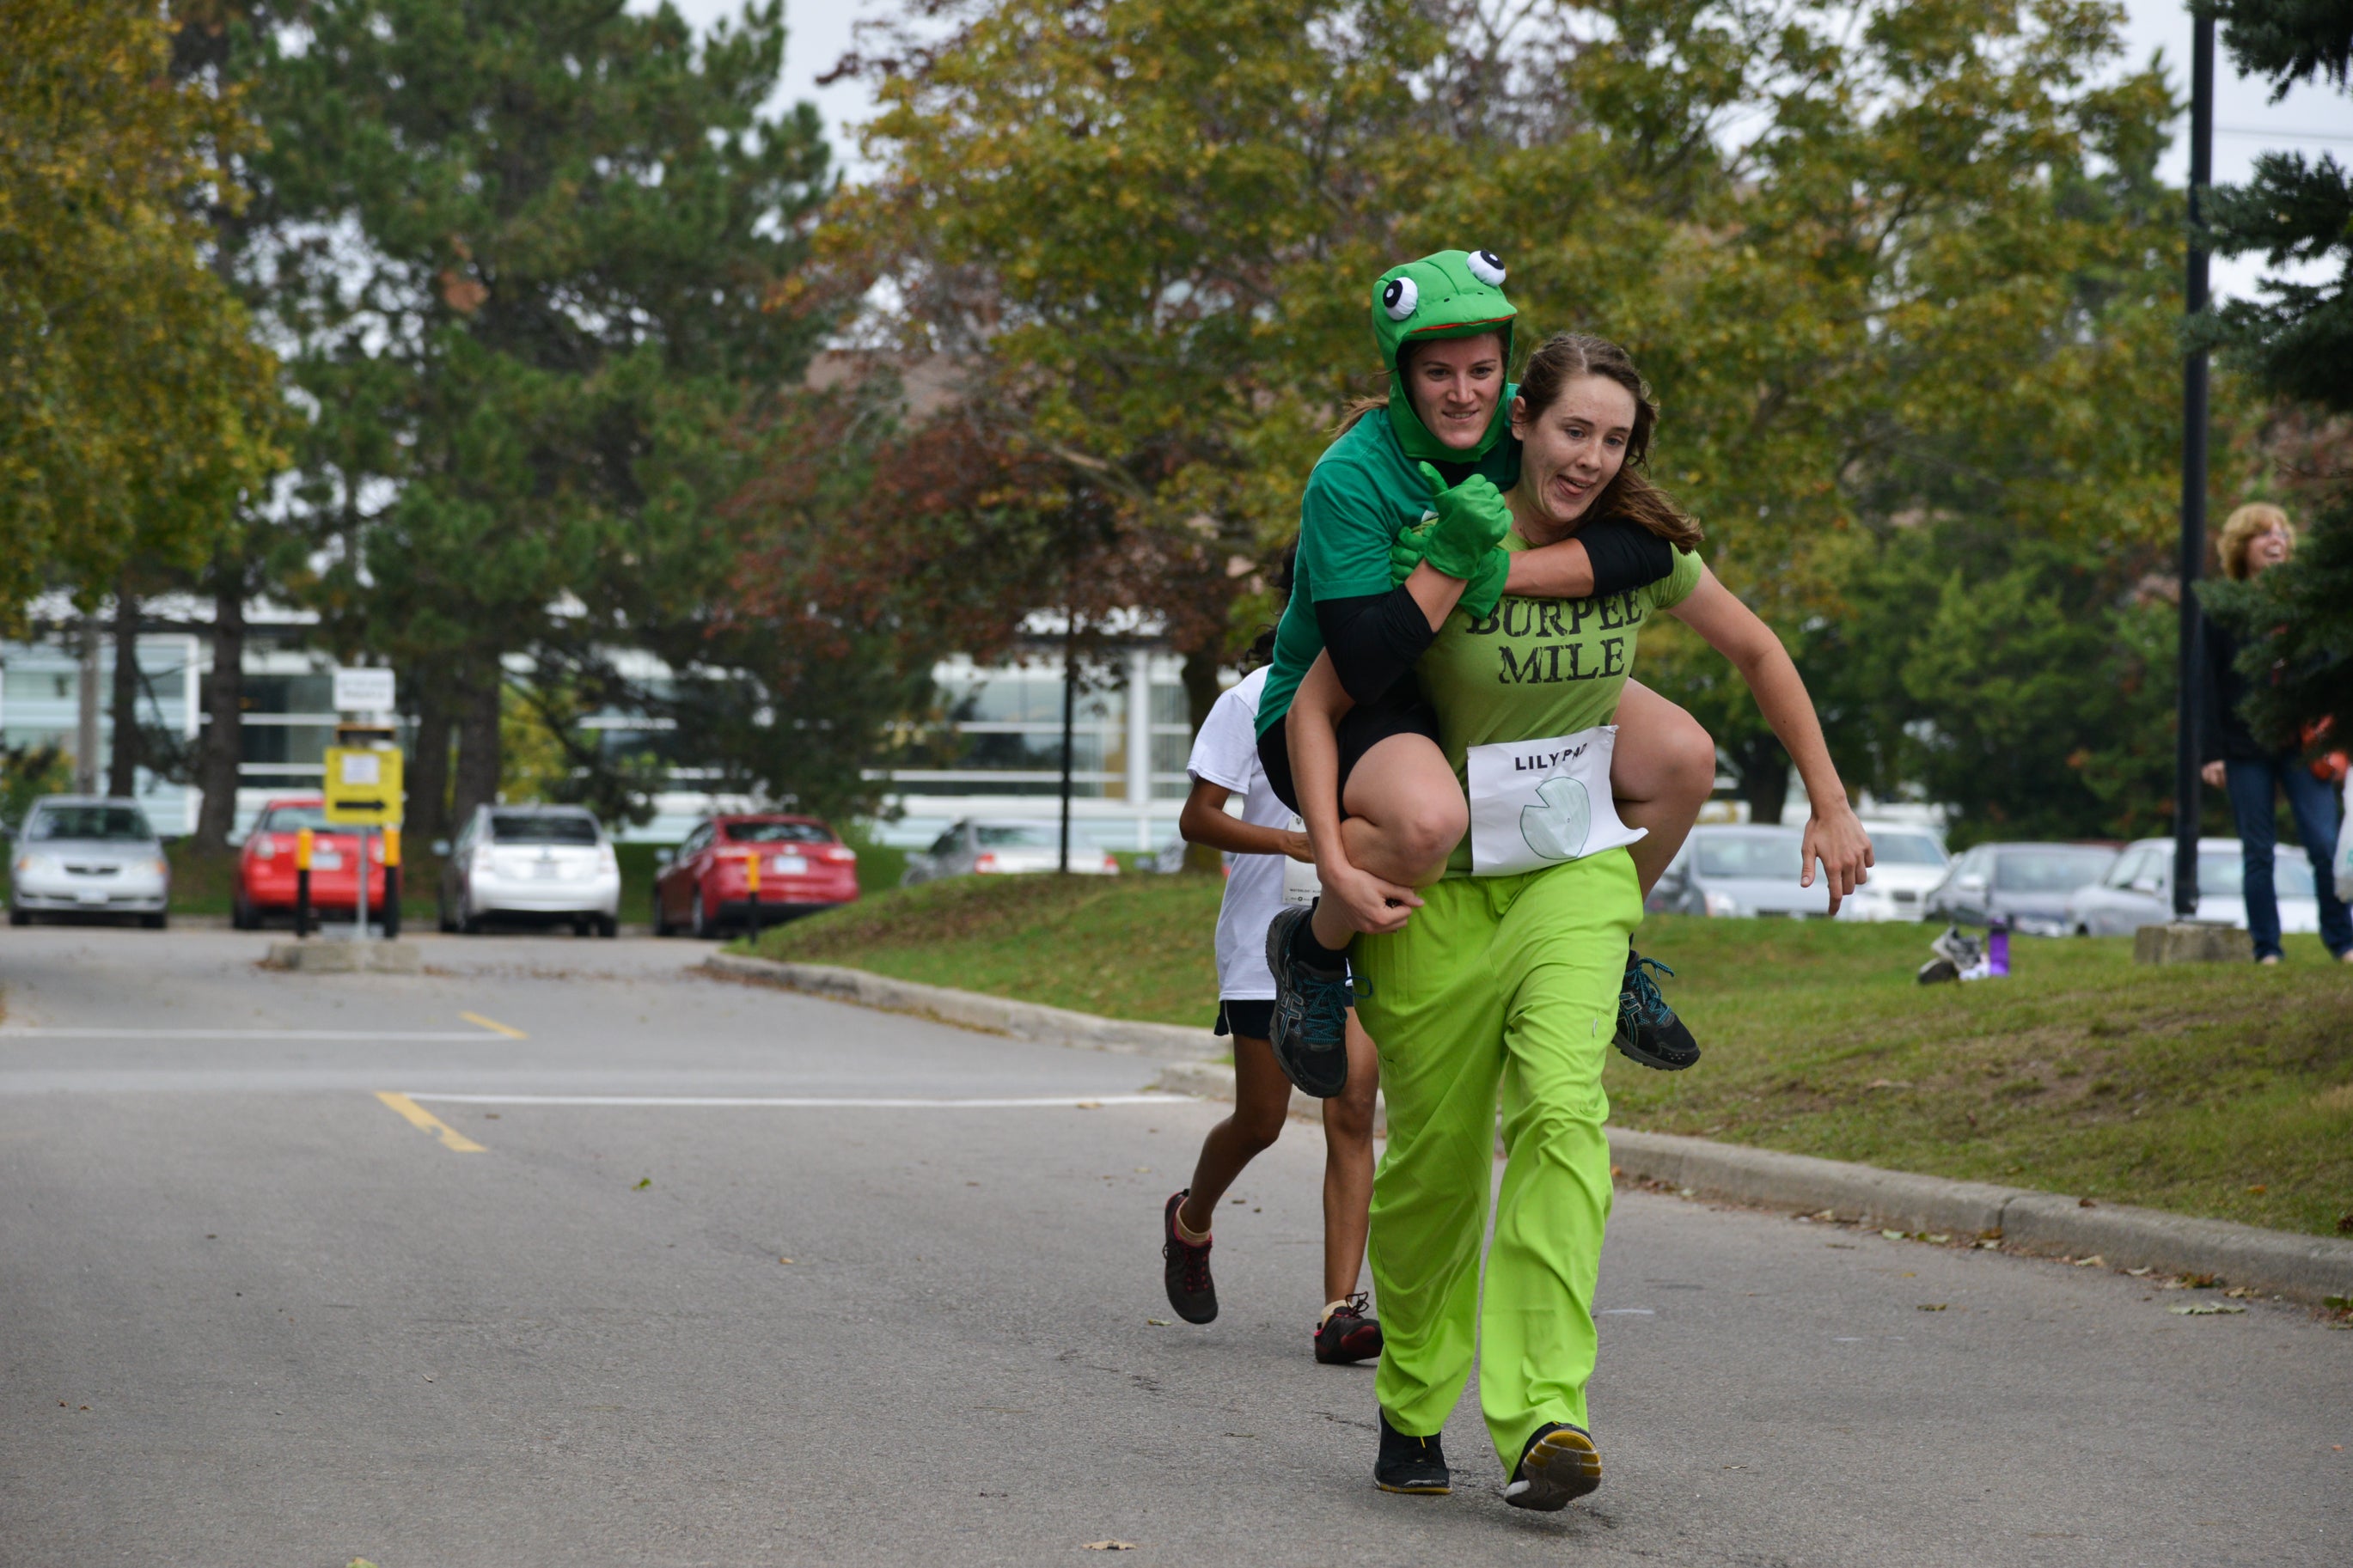 One student carrying another student on her back.